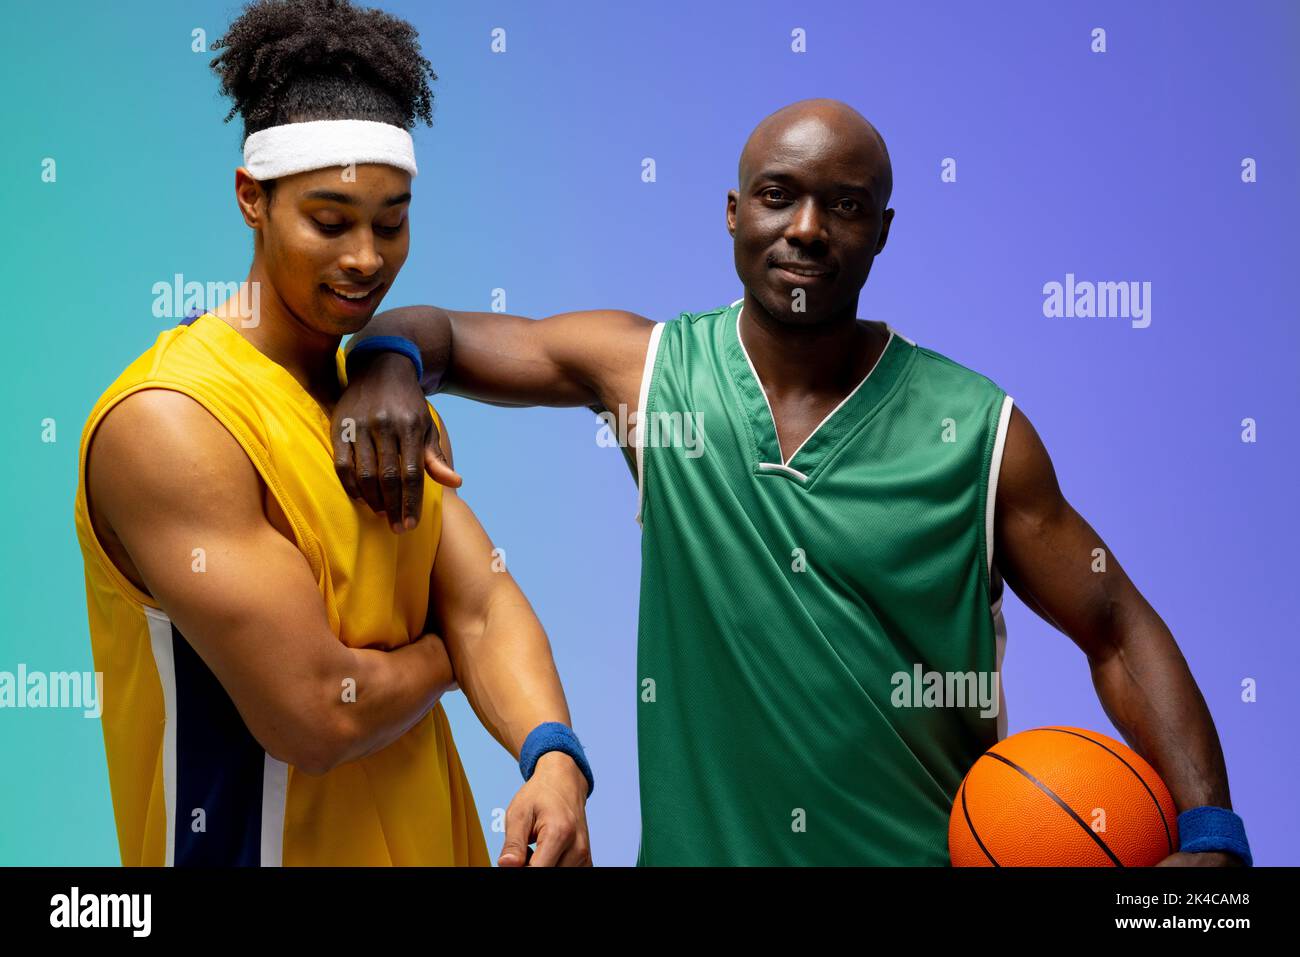 Image of portrait of two diverse basketball players with basketball on purple to green background. Sports and competition concept. Stock Photo